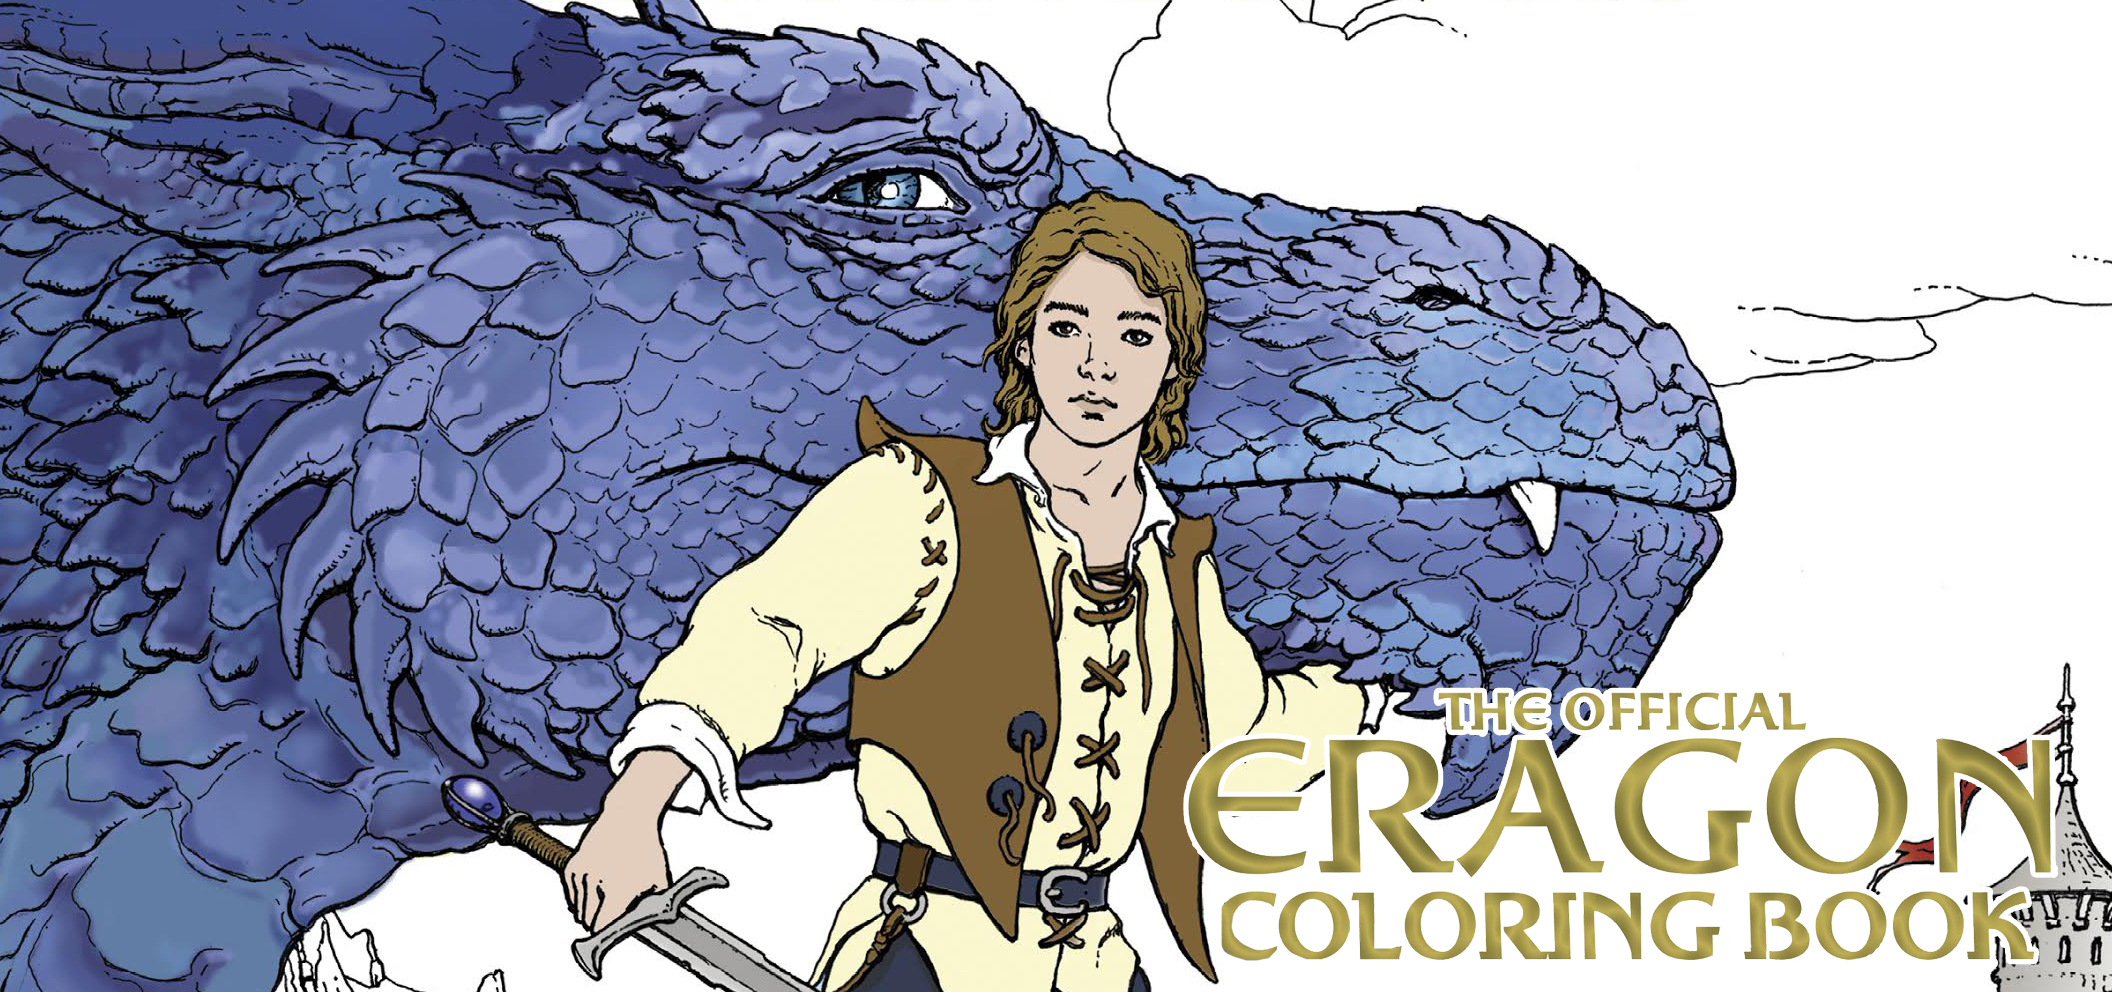 First look at the Official Eragon Coloring Book and book tour dates